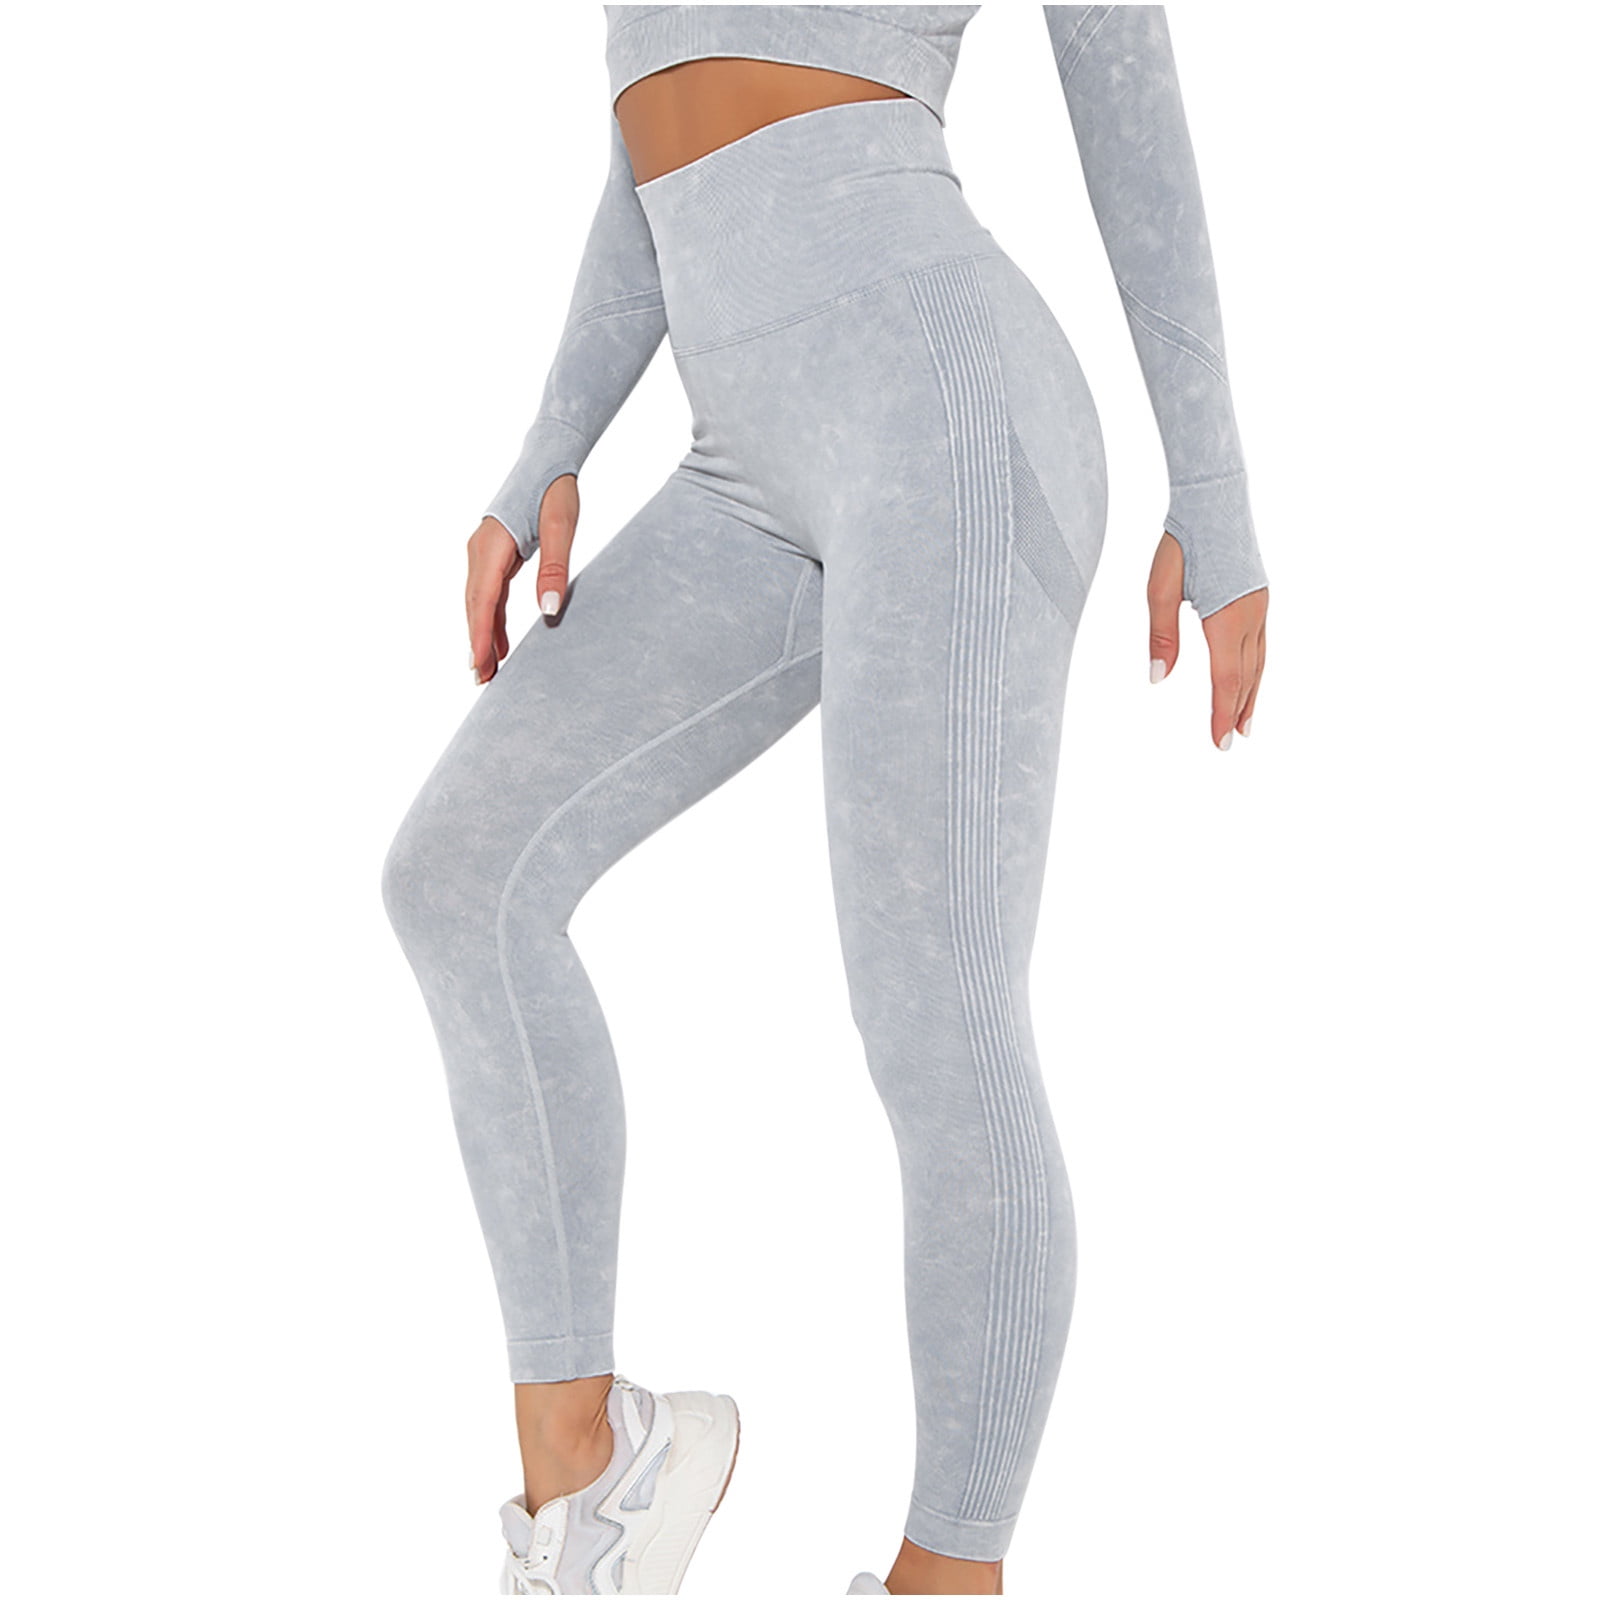 RYDCOT Leggings Pants with Pockets for Women Tummy Control Workout Running  Stretch Cargo Pocket Leggings Butt Lifting Yoga Workout Gym Pants Clearance